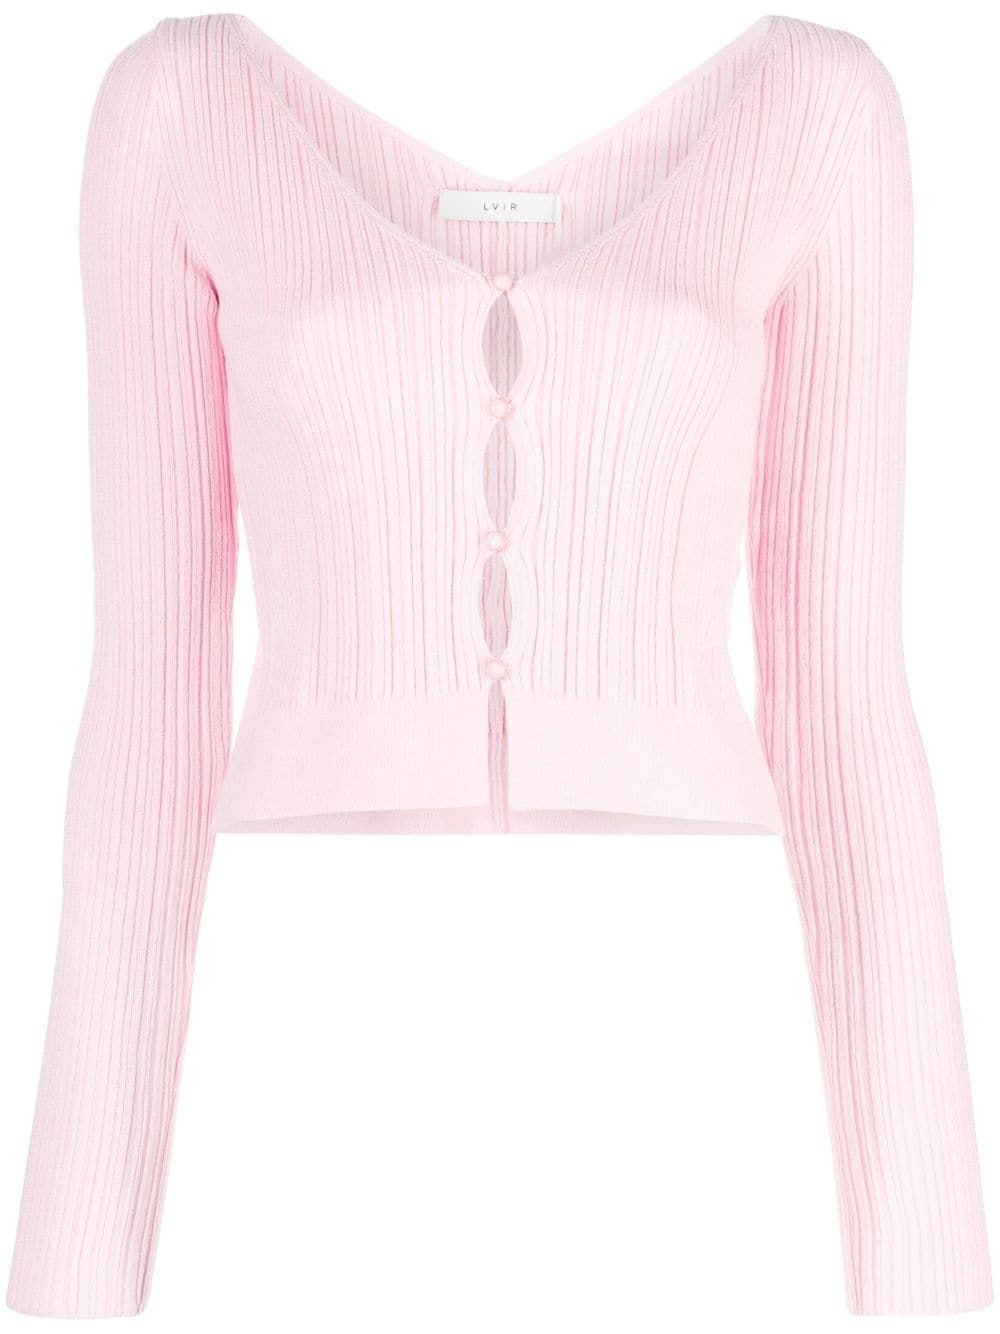 Top 15 Pink Cardigan Outfit Ideas: How to Dress in Ladylike Ways